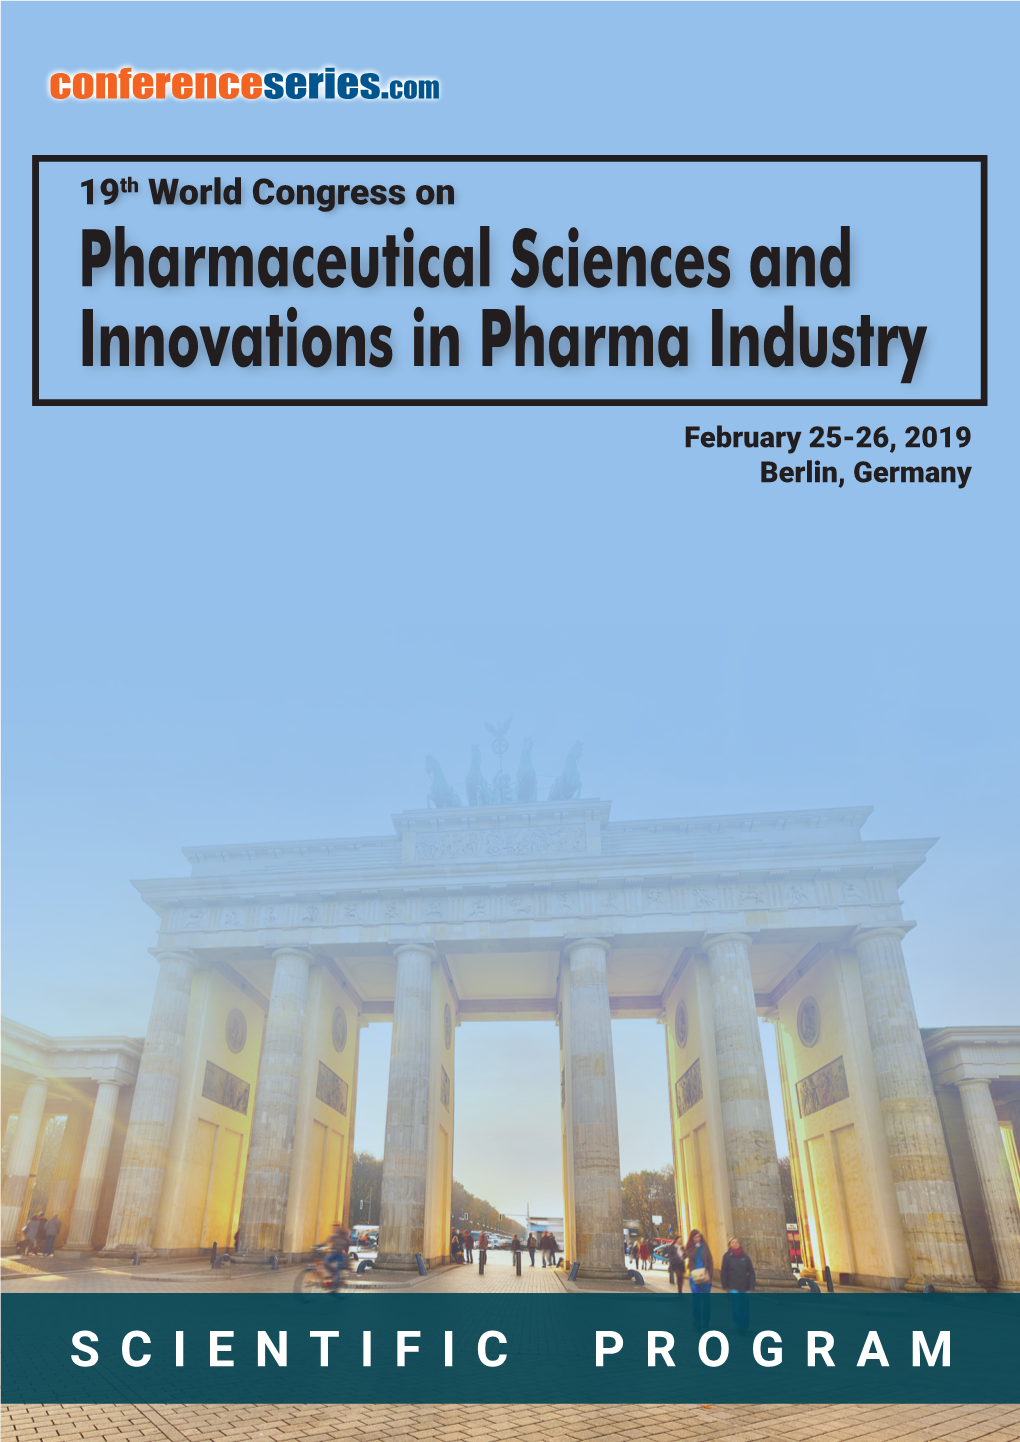 Pharmaceutical Sciences and Innovations in Pharma Industry